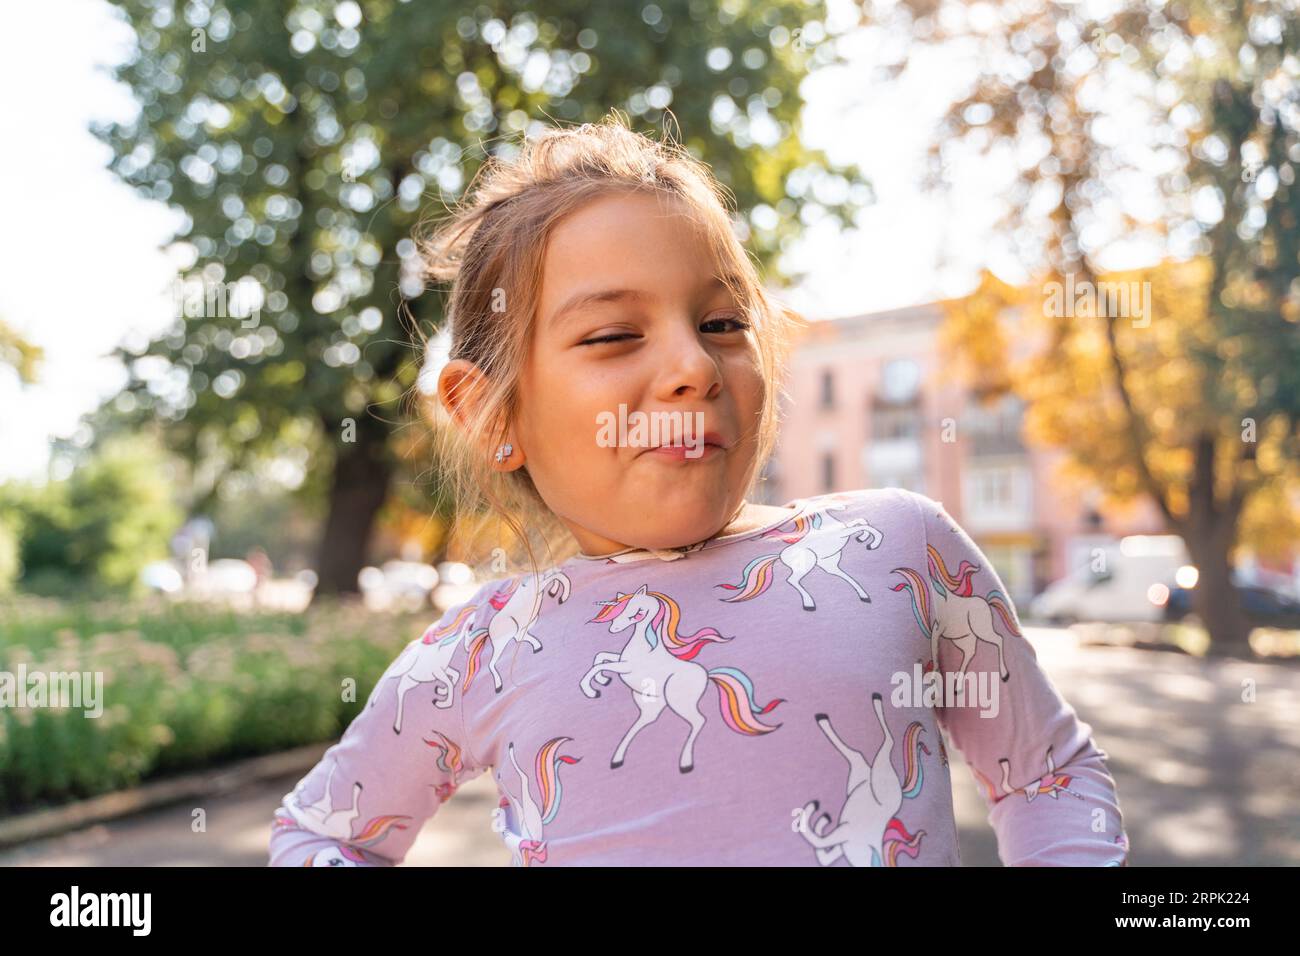 Portrait of a funny caucasian 5-6 years old girl making a face outdoors in  a city. Close-up portrait of grimacing child Stock Photo - Alamy